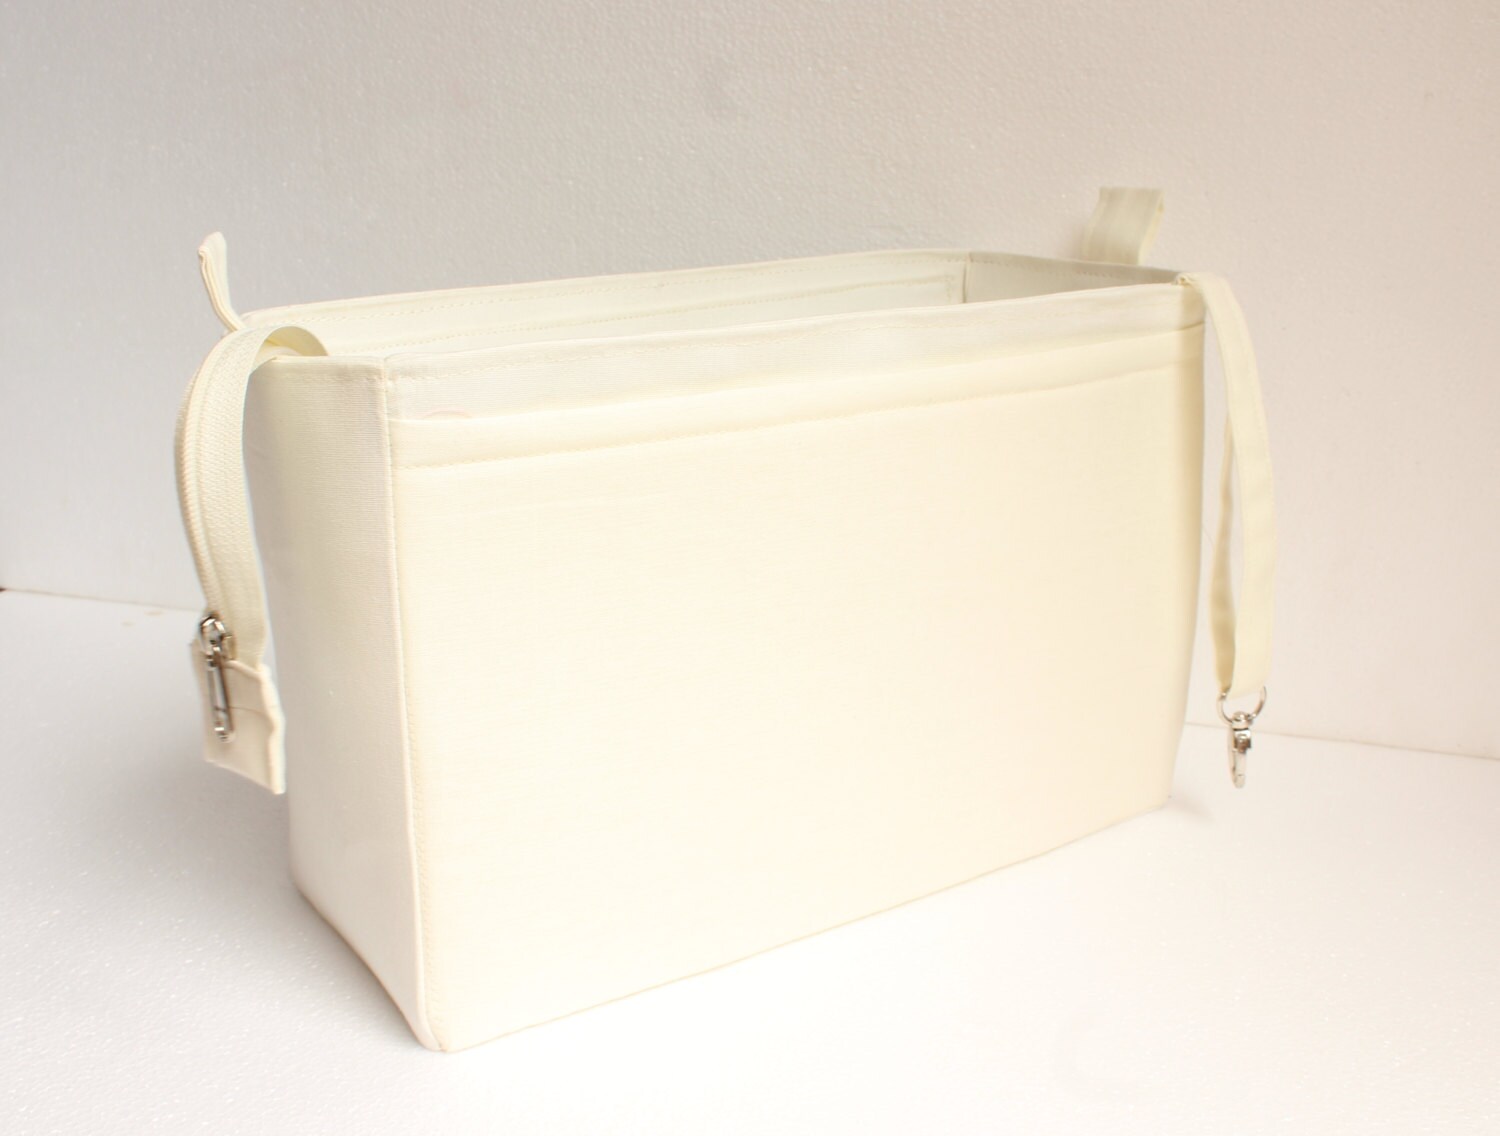 Extra Tall Large Bag Insert /purse Insert With Zipper Closure 